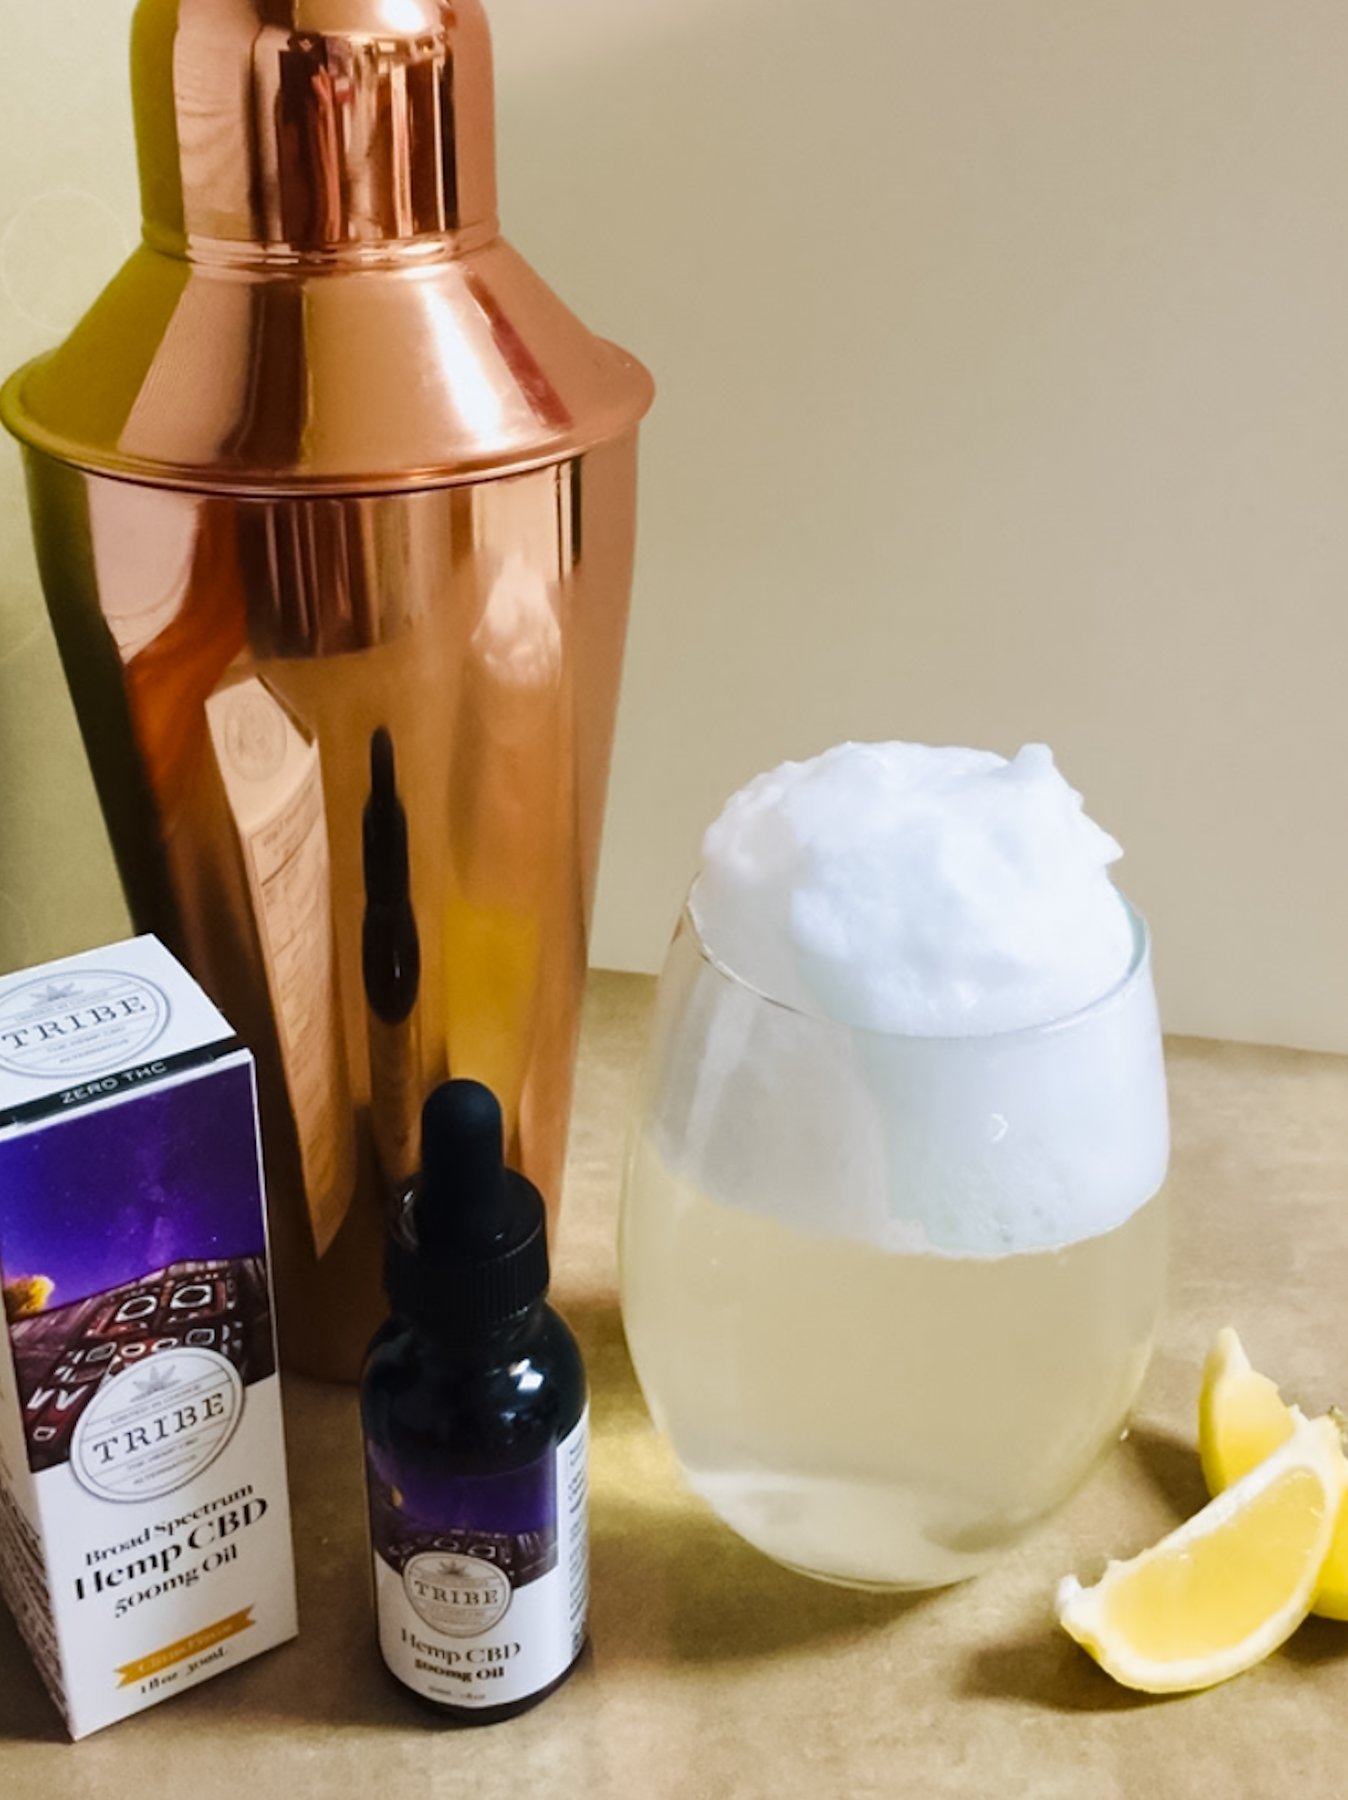 “Shake Up” Your Collins Routine - Tribe’s CBD Gin Fizz